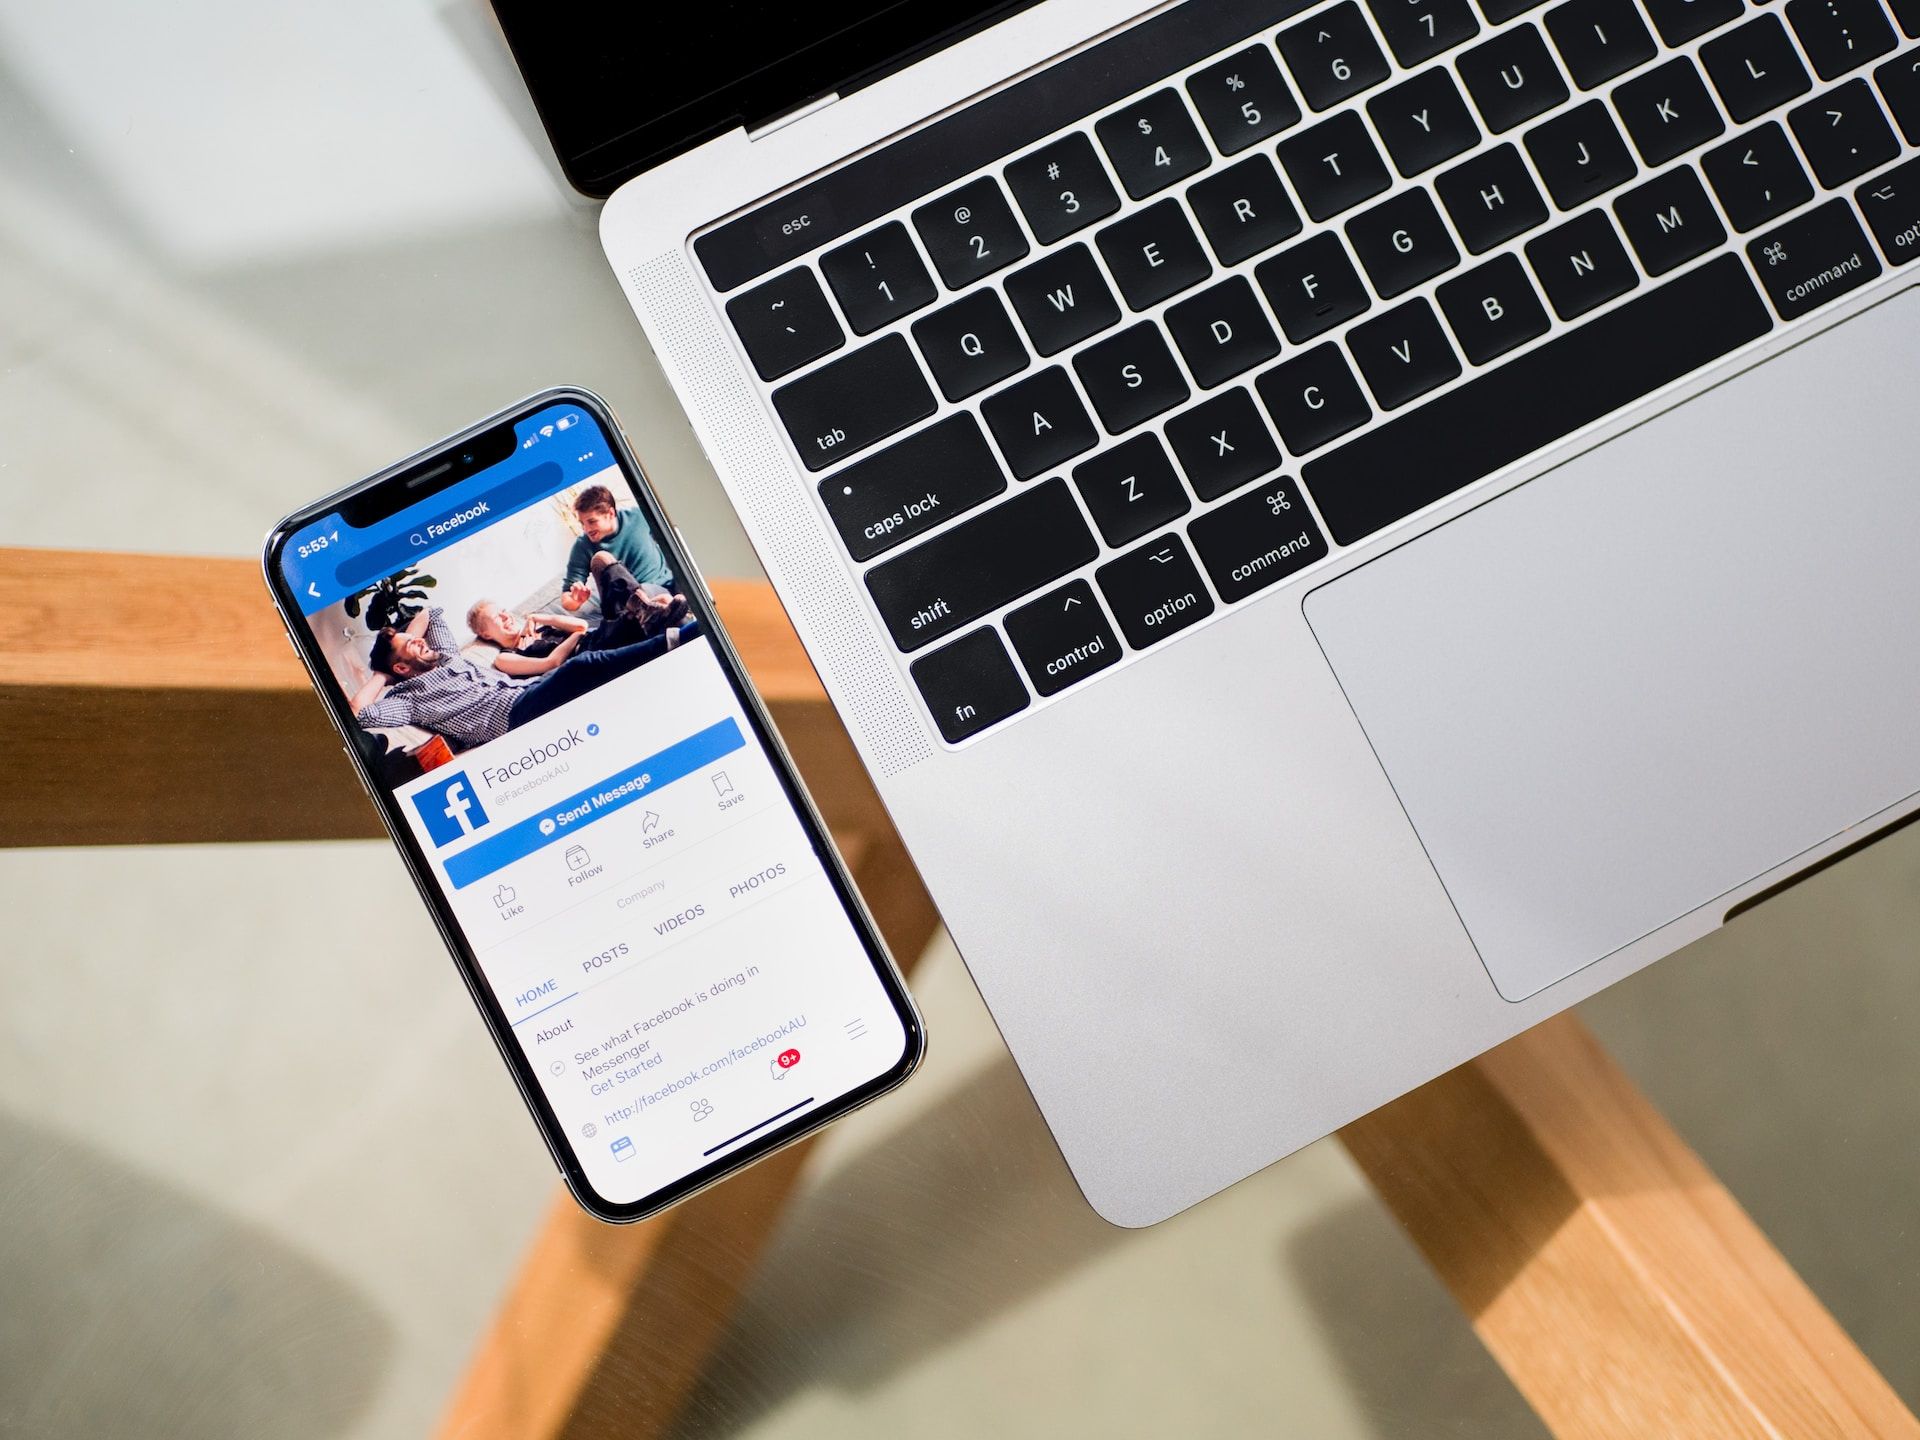 iPhone X displaying the Facebook App beside a MacBook